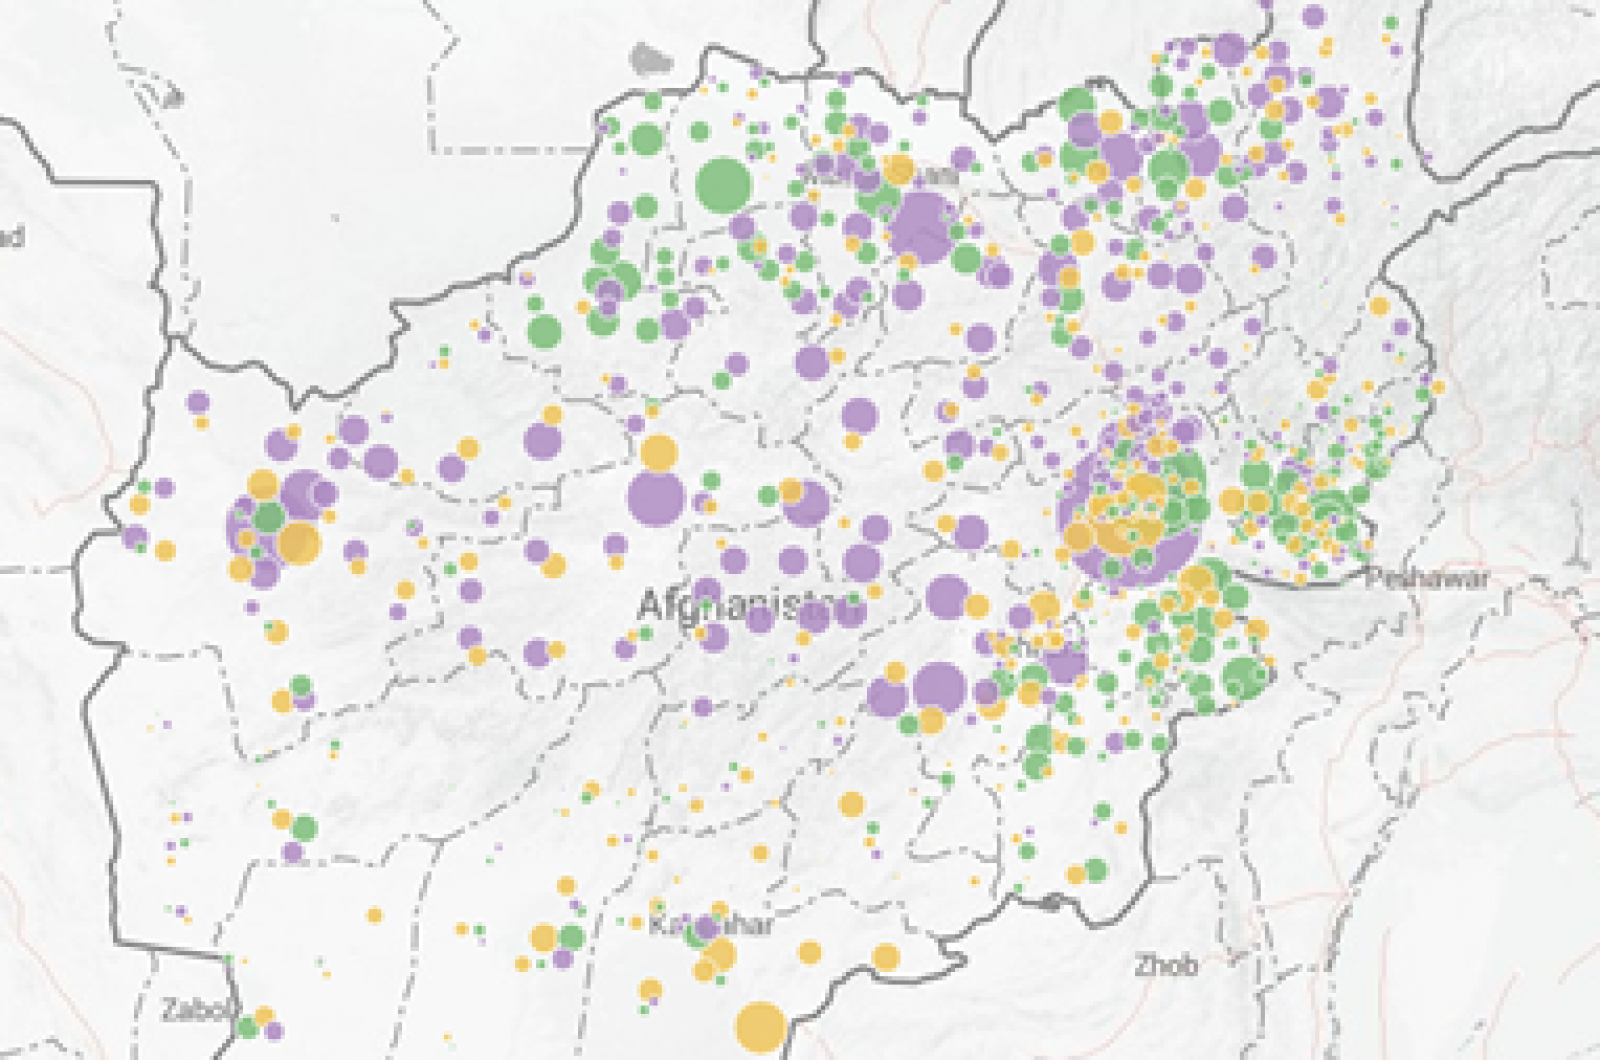 NDI Launches New Visualizations Ahead of Saturday's Presidential Runoff Election in Afghanistan